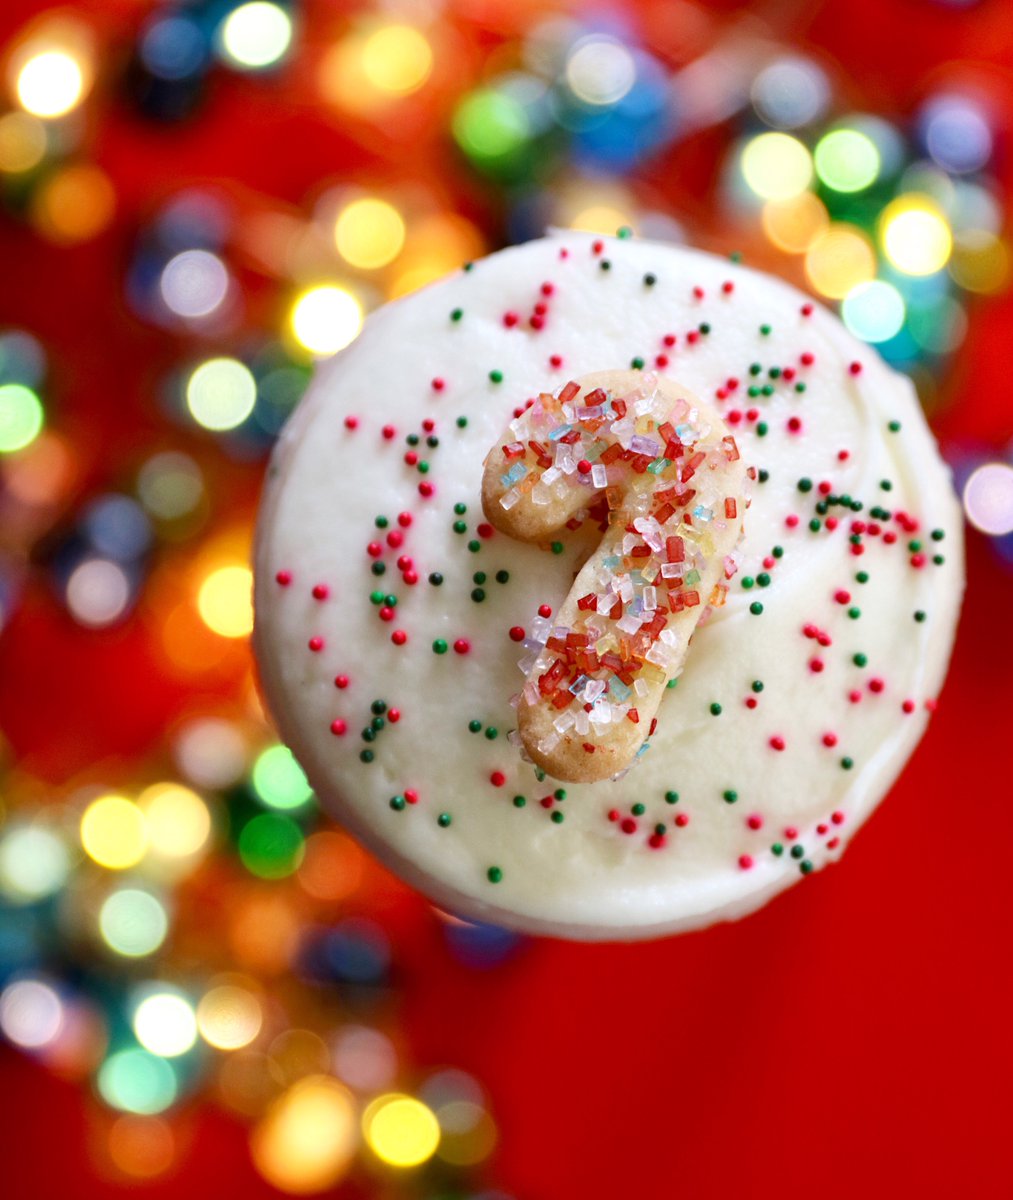 Sprinkles Cupcakes On Twitter Making Spirits Bright With Every Bite Christmas Cookie Cupcake Now Baking At All Sprinkles Through 12 26 Sprinklejoy Tistheseason Https T Co L1a38lez4j